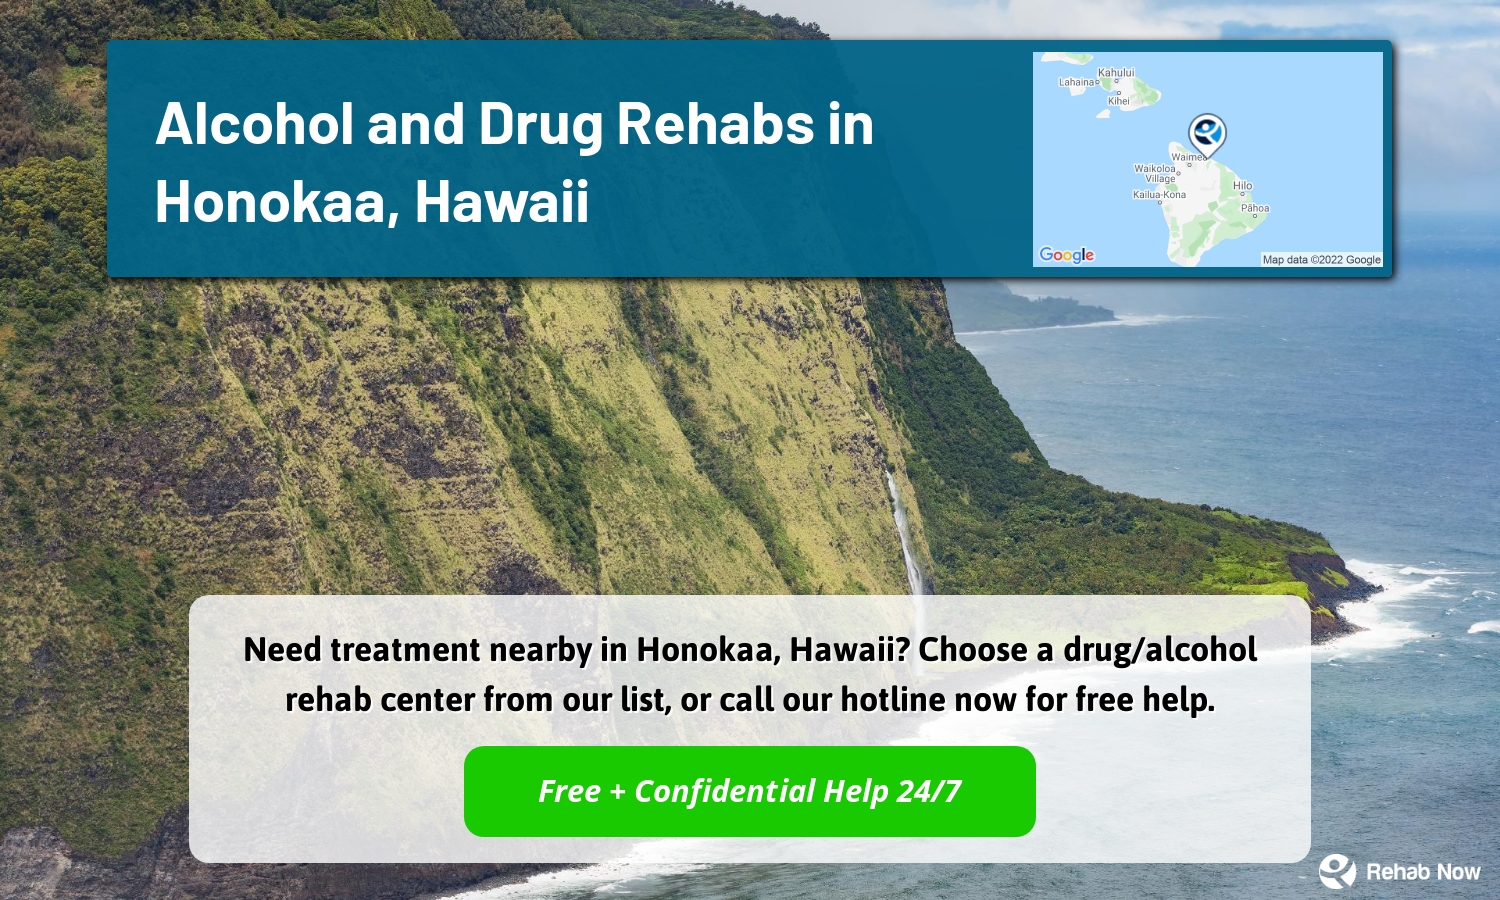 Need treatment nearby in Honokaa, Hawaii? Choose a drug/alcohol rehab center from our list, or call our hotline now for free help.